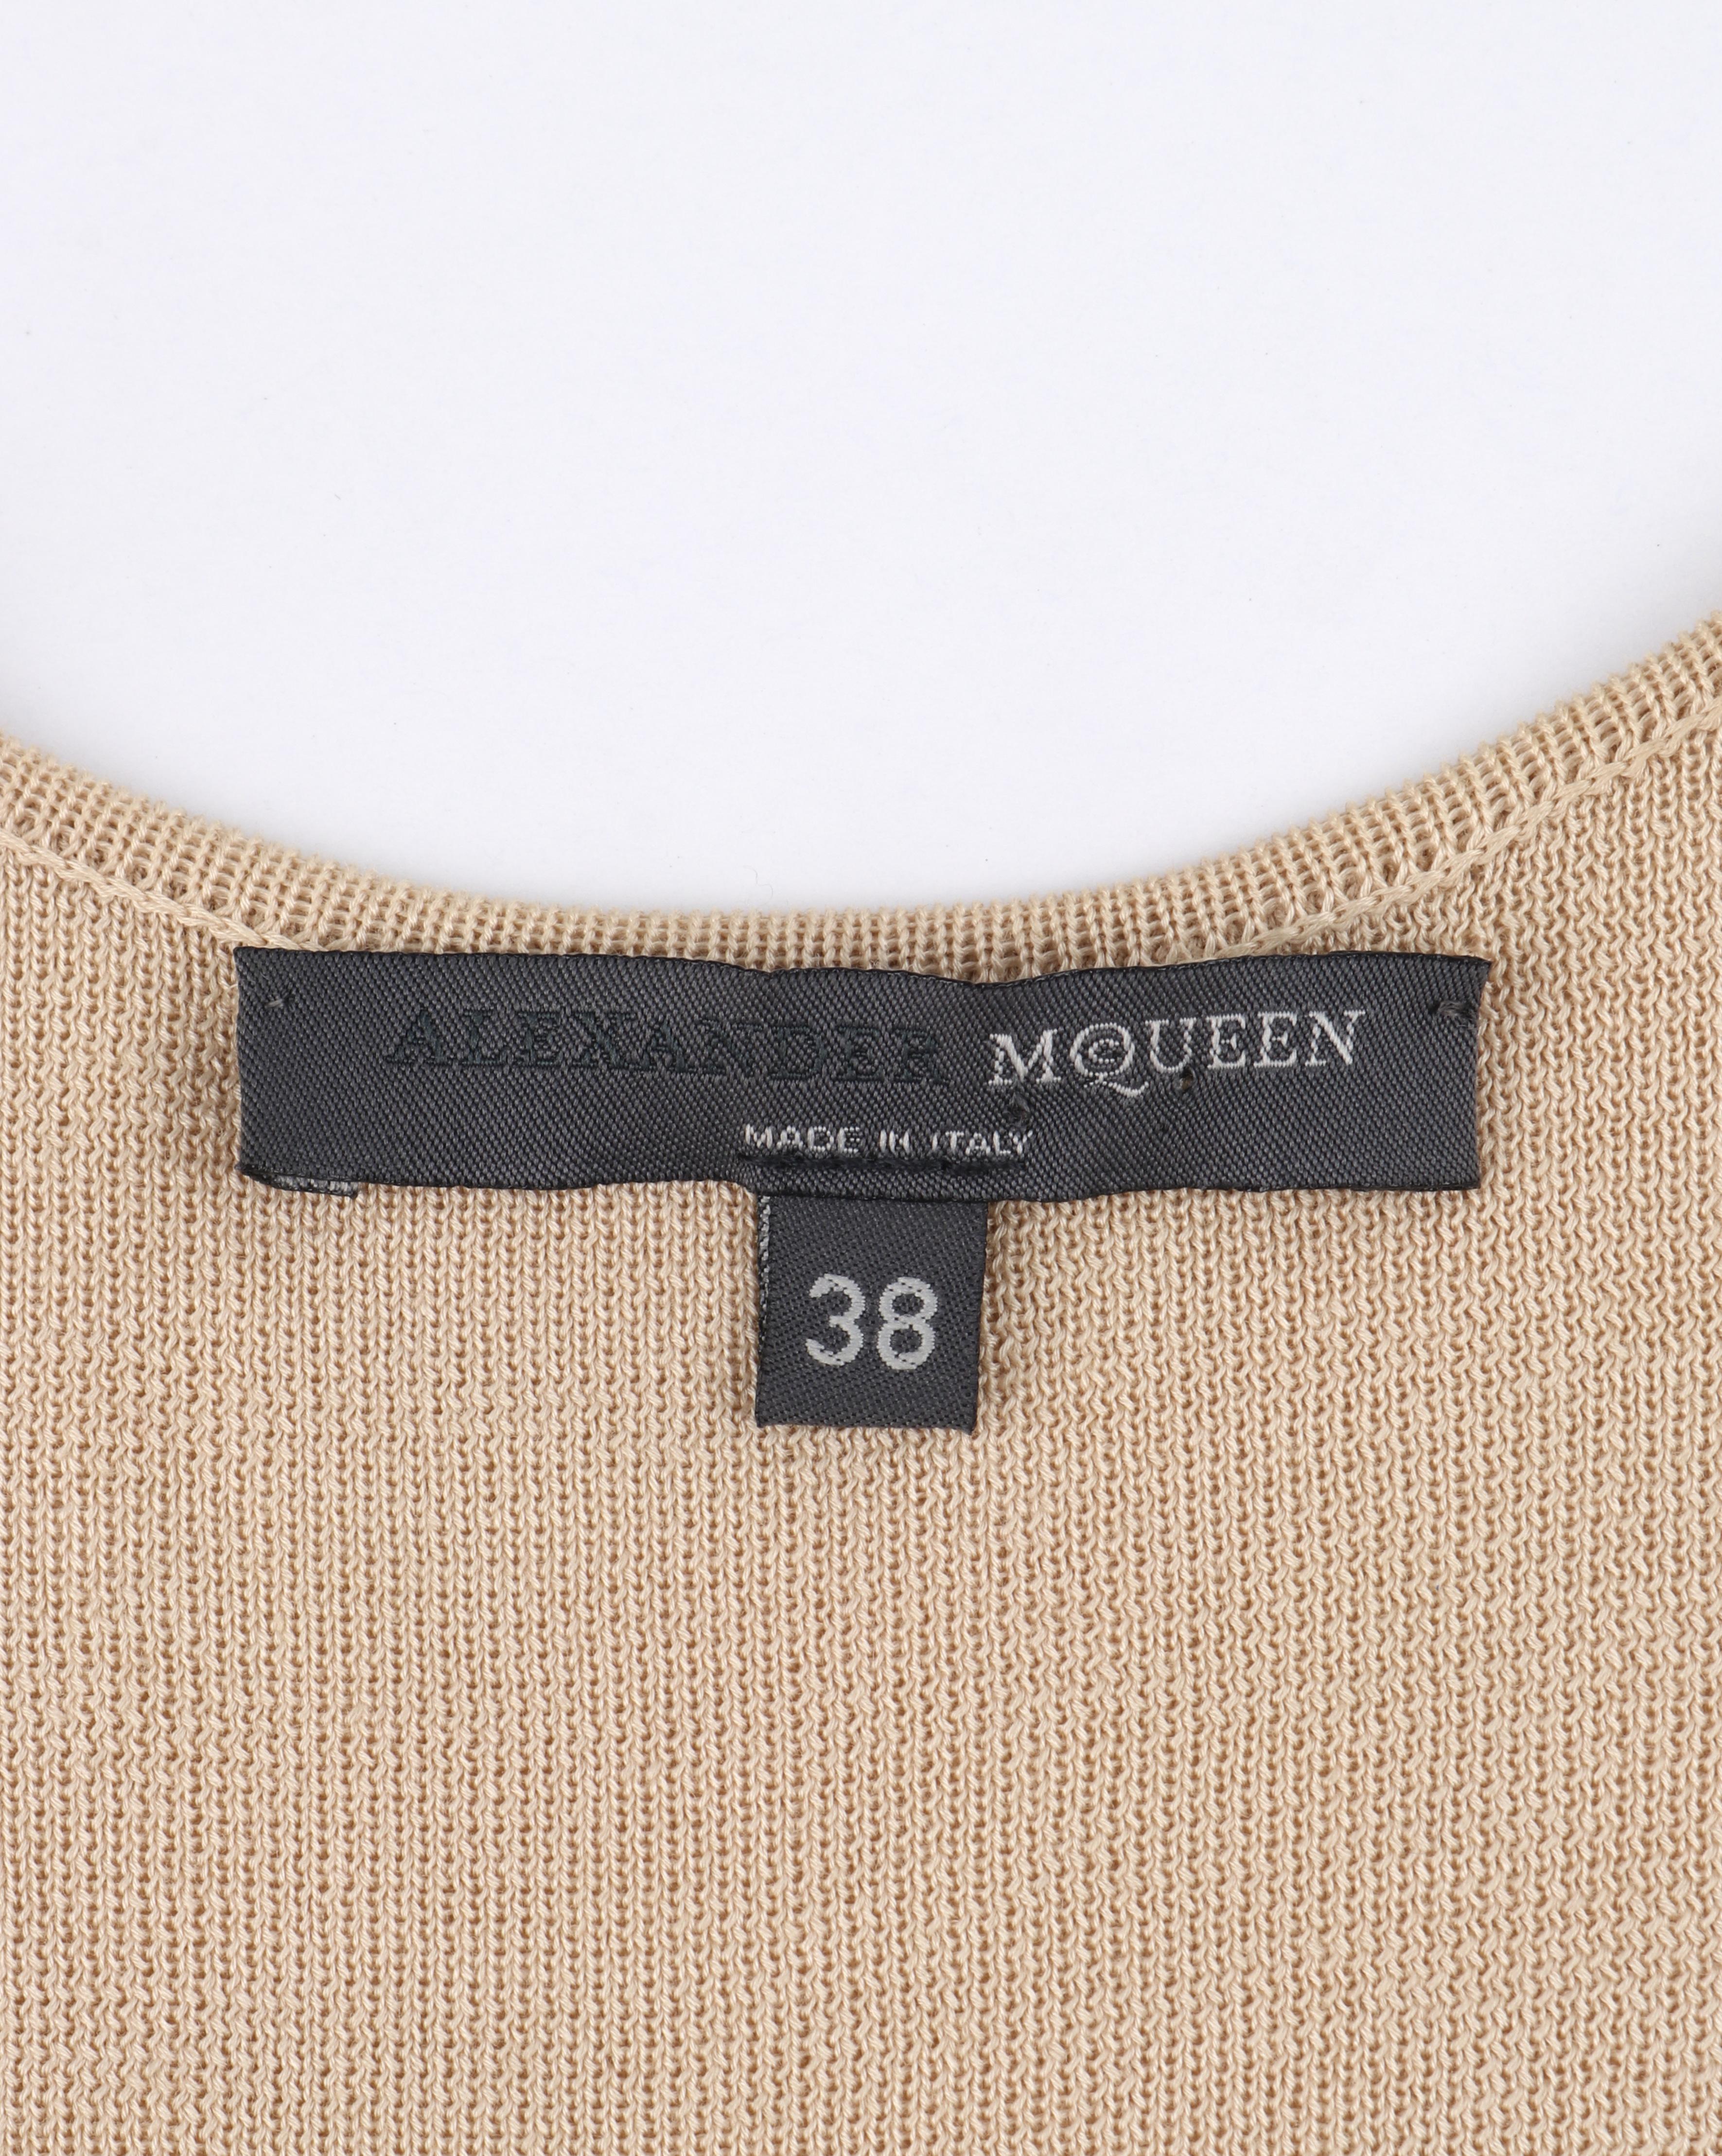 ALEXANDER McQUEEN c.2000’s Tan Scoop Neck Low Cut Side Racerback Knit Tank Top In Good Condition For Sale In Thiensville, WI